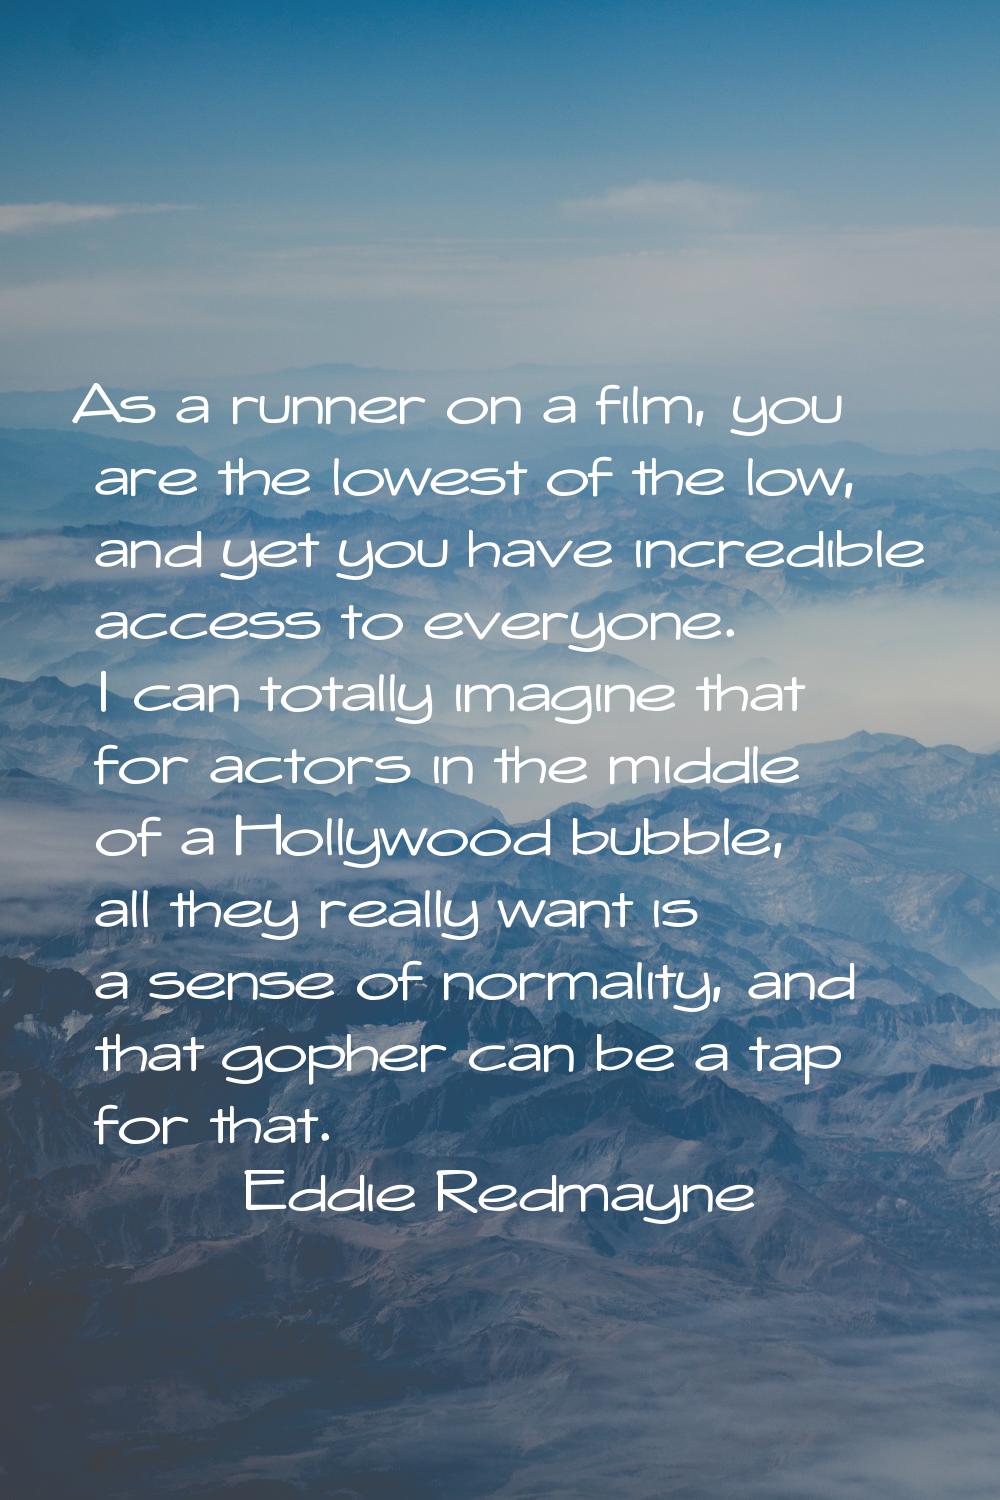 As a runner on a film, you are the lowest of the low, and yet you have incredible access to everyon